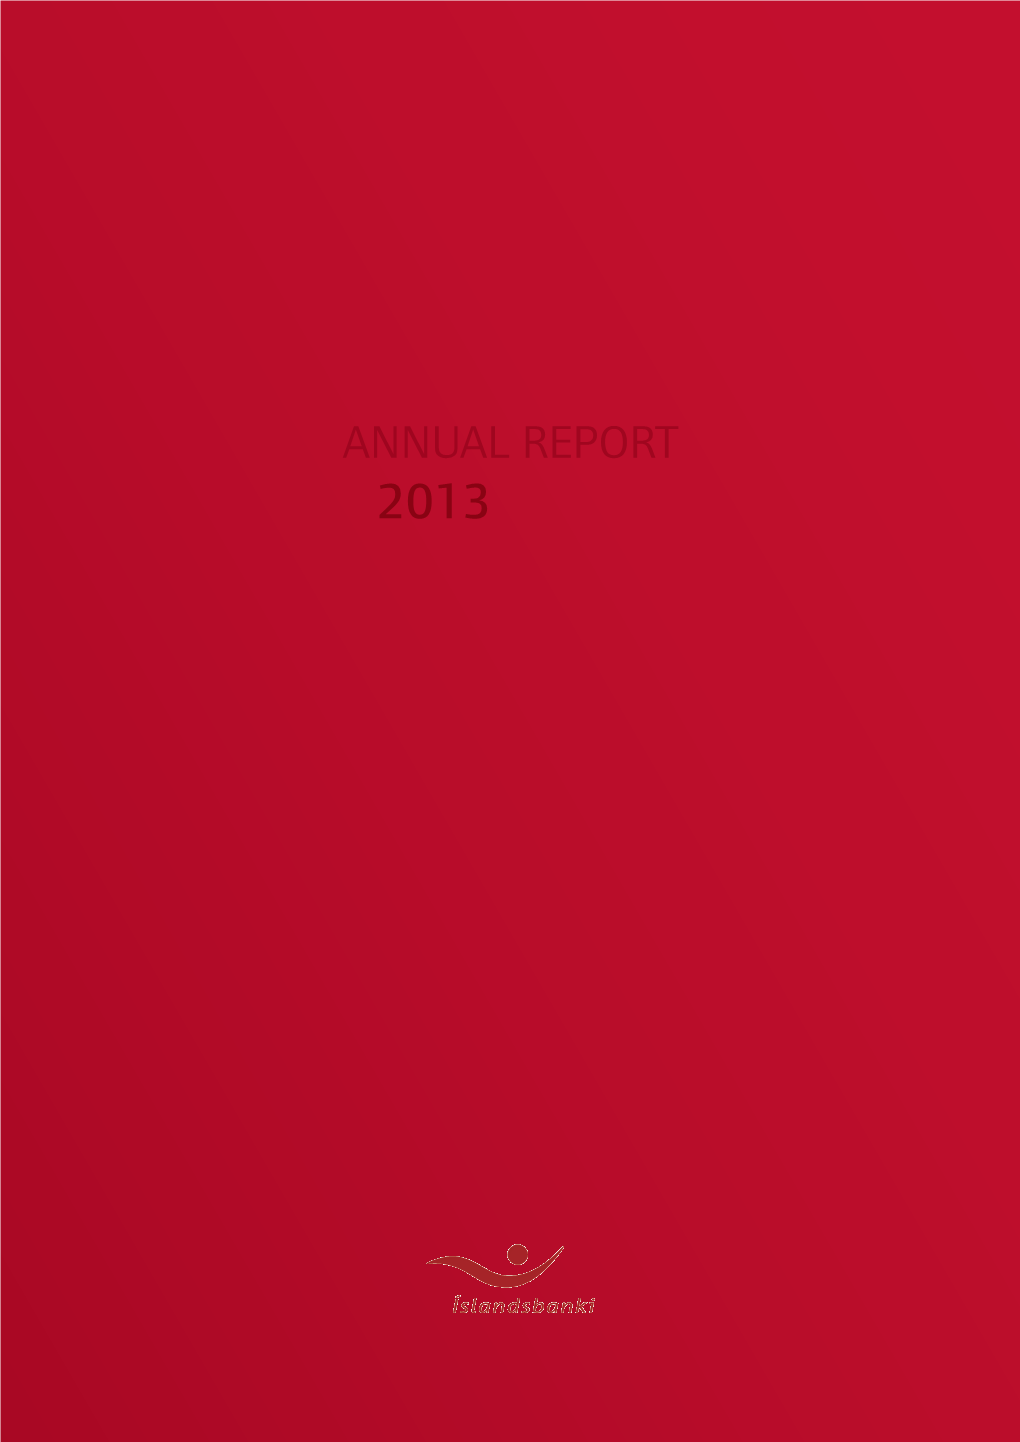 The 2013 Annual Report and Risk Report.Pdf